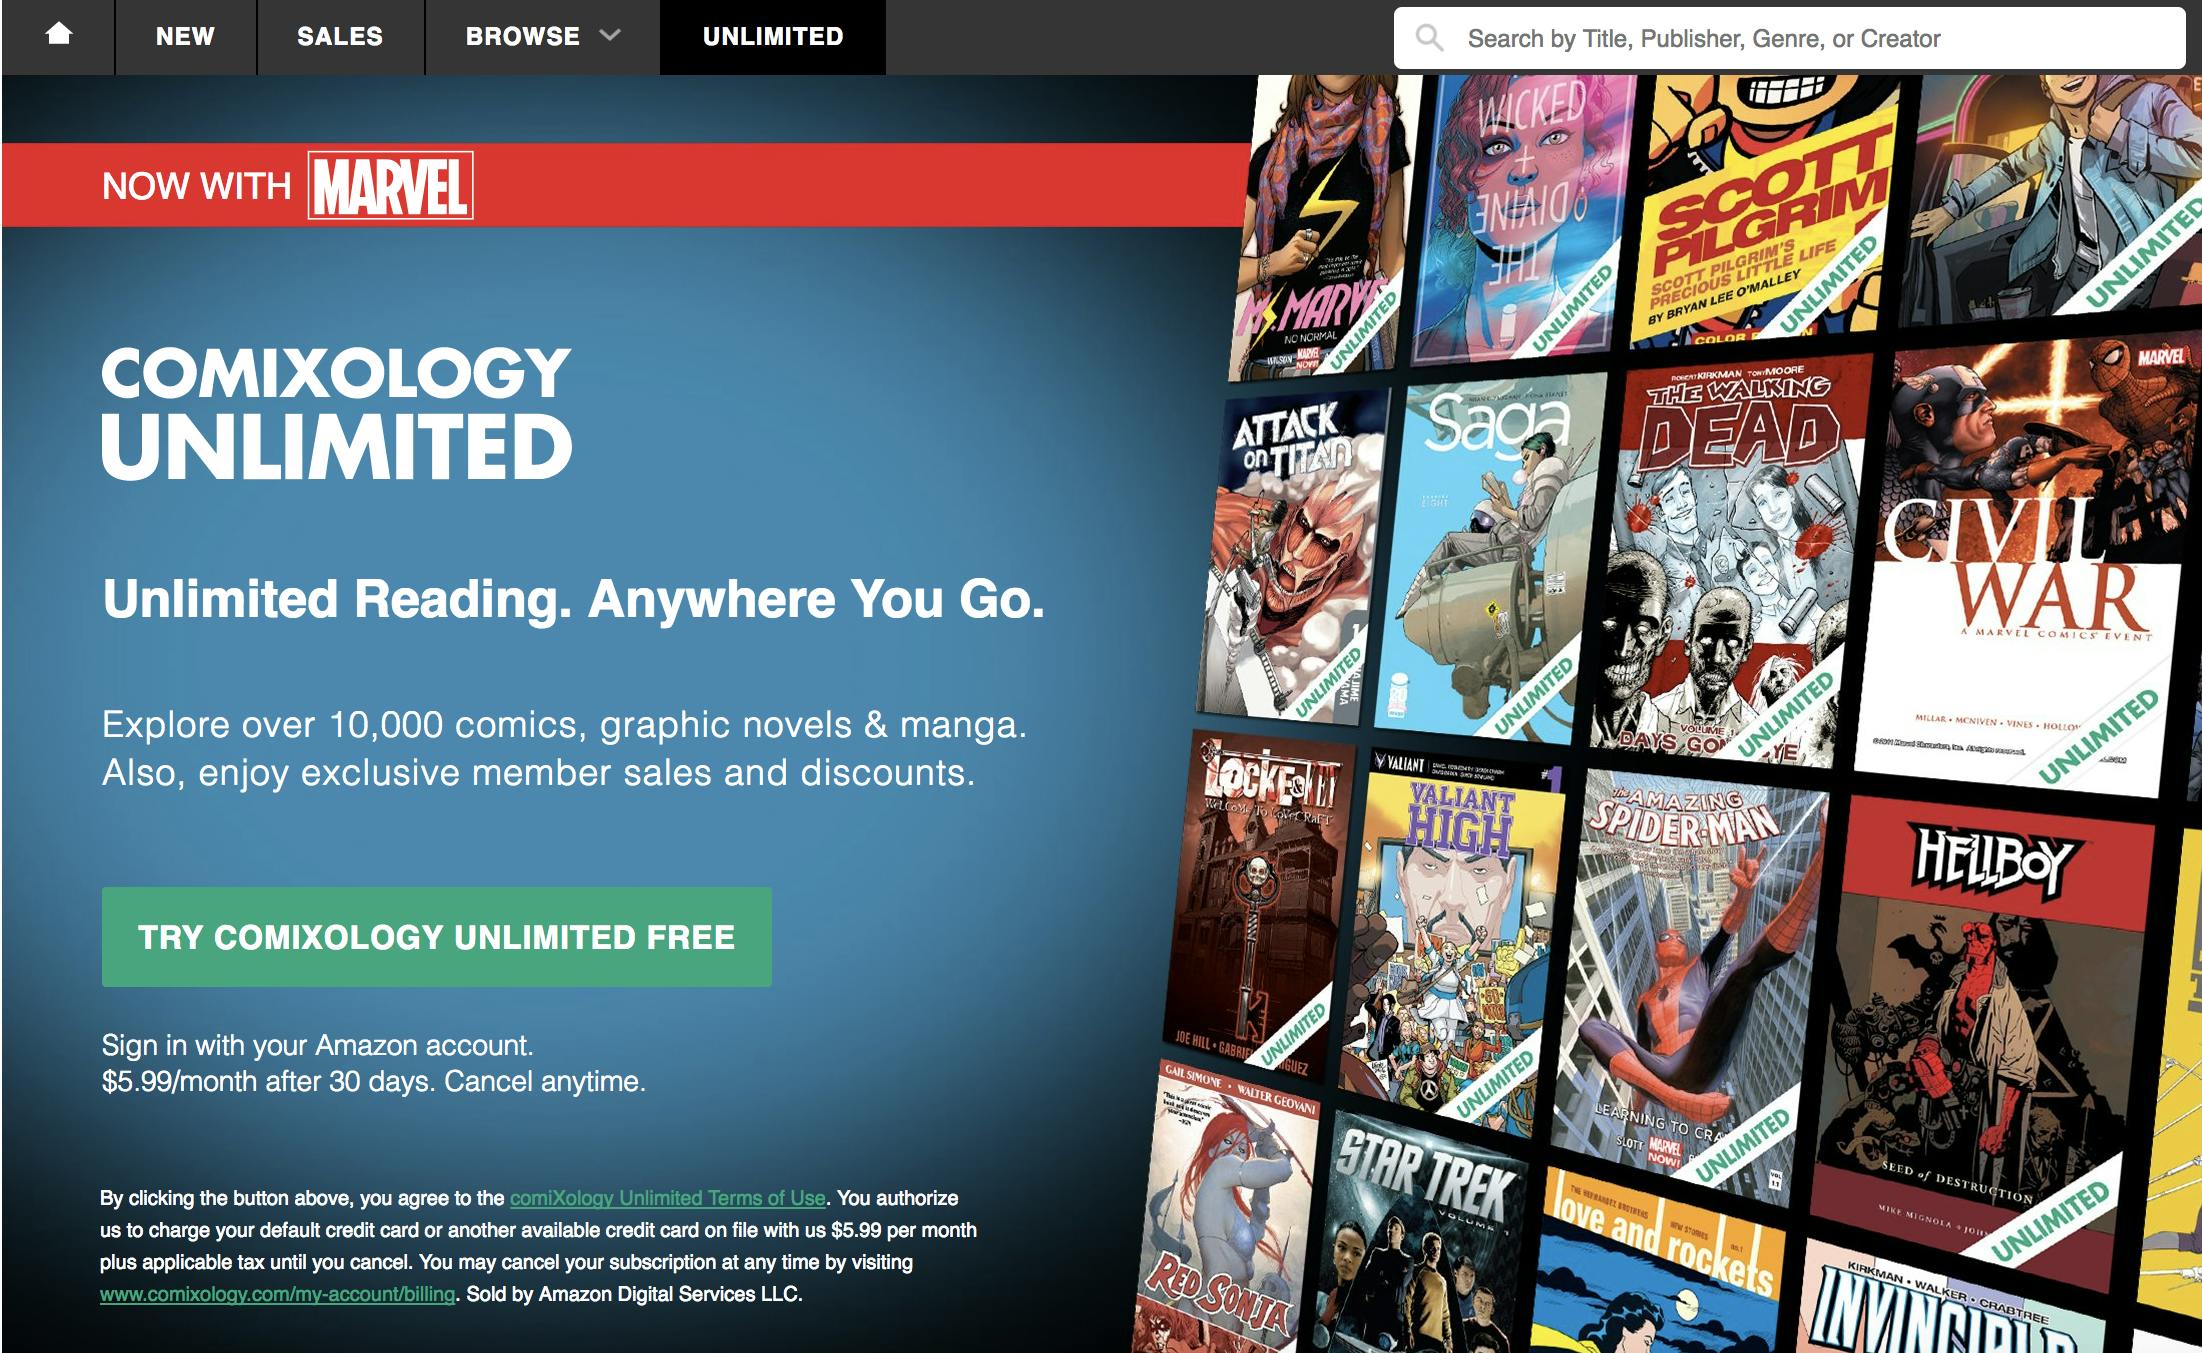 Is ComiXology Unlimited Worth It? Price, Perks, Pros & Cons